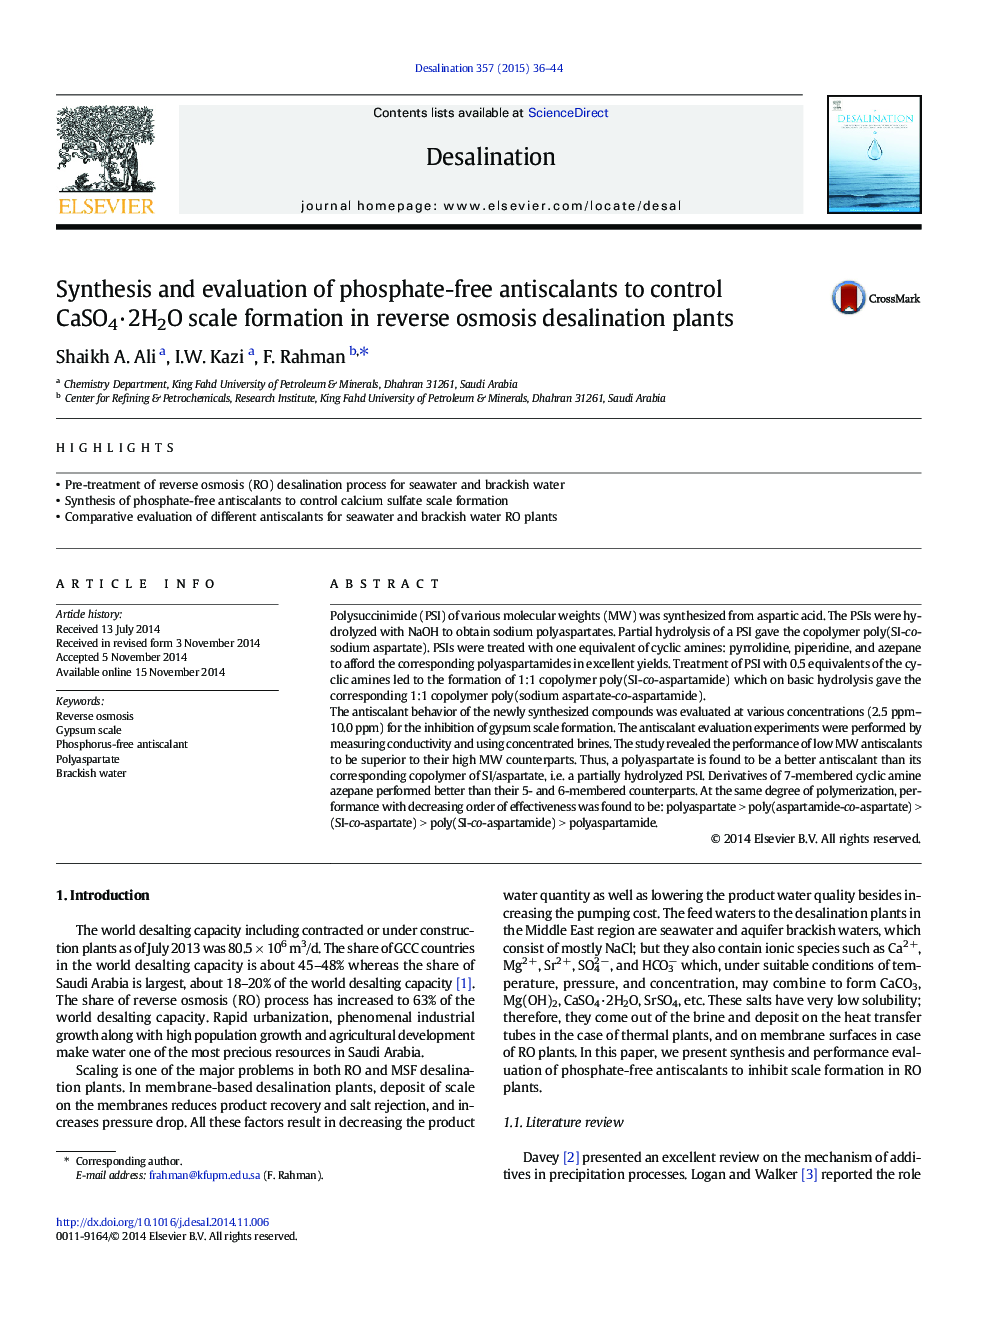 Synthesis and evaluation of phosphate-free antiscalants to control CaSO4Â·2H2O scale formation in reverse osmosis desalination plants